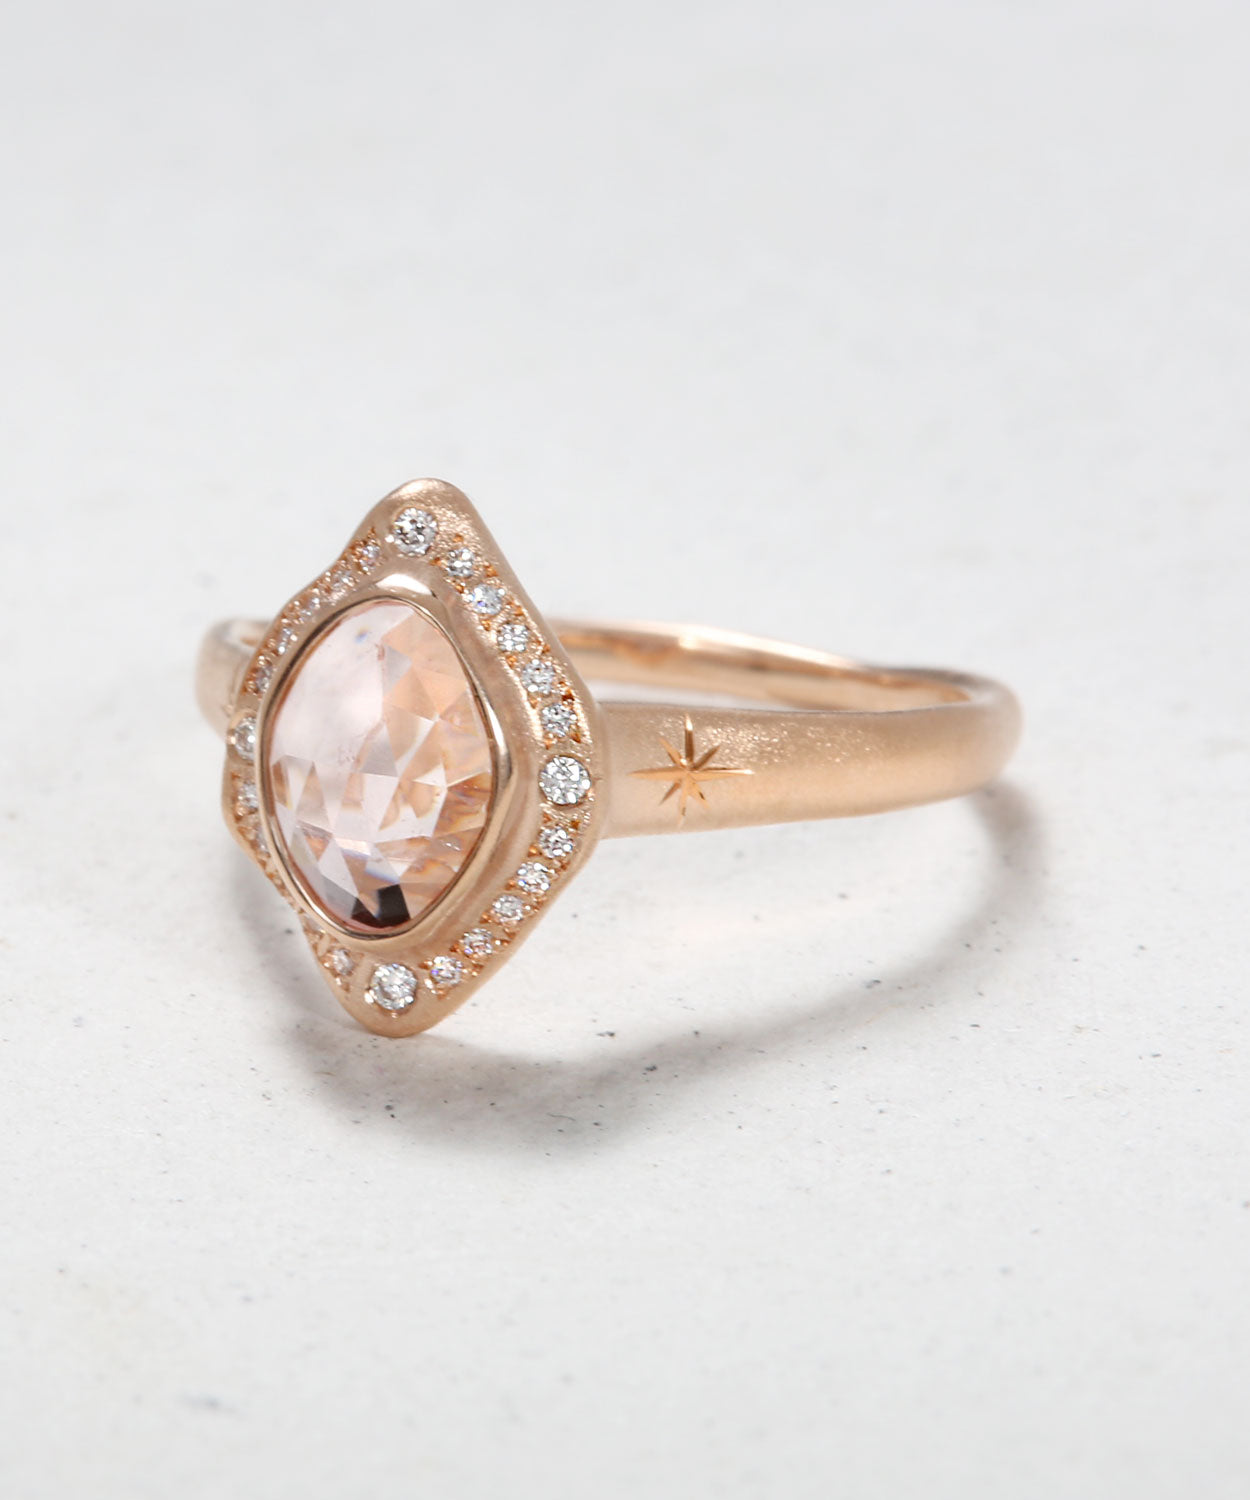 Isadora the Amor Ring